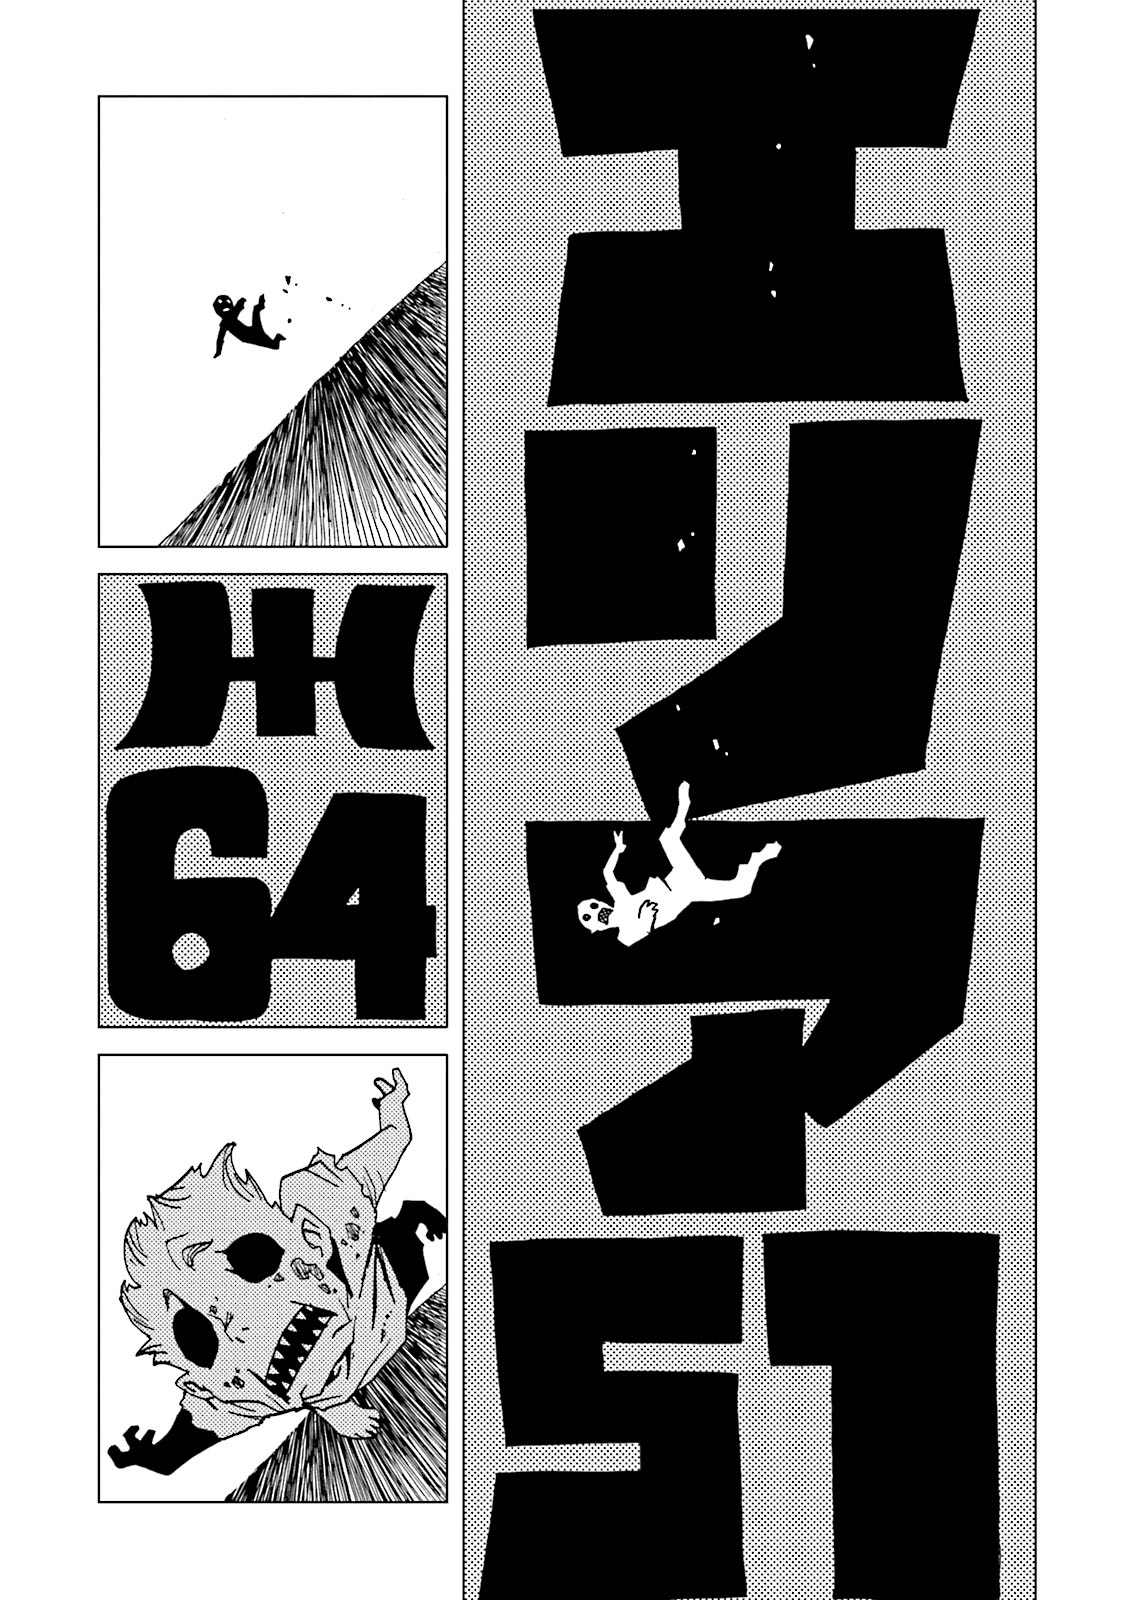 AREA51 - 第64话 - 5